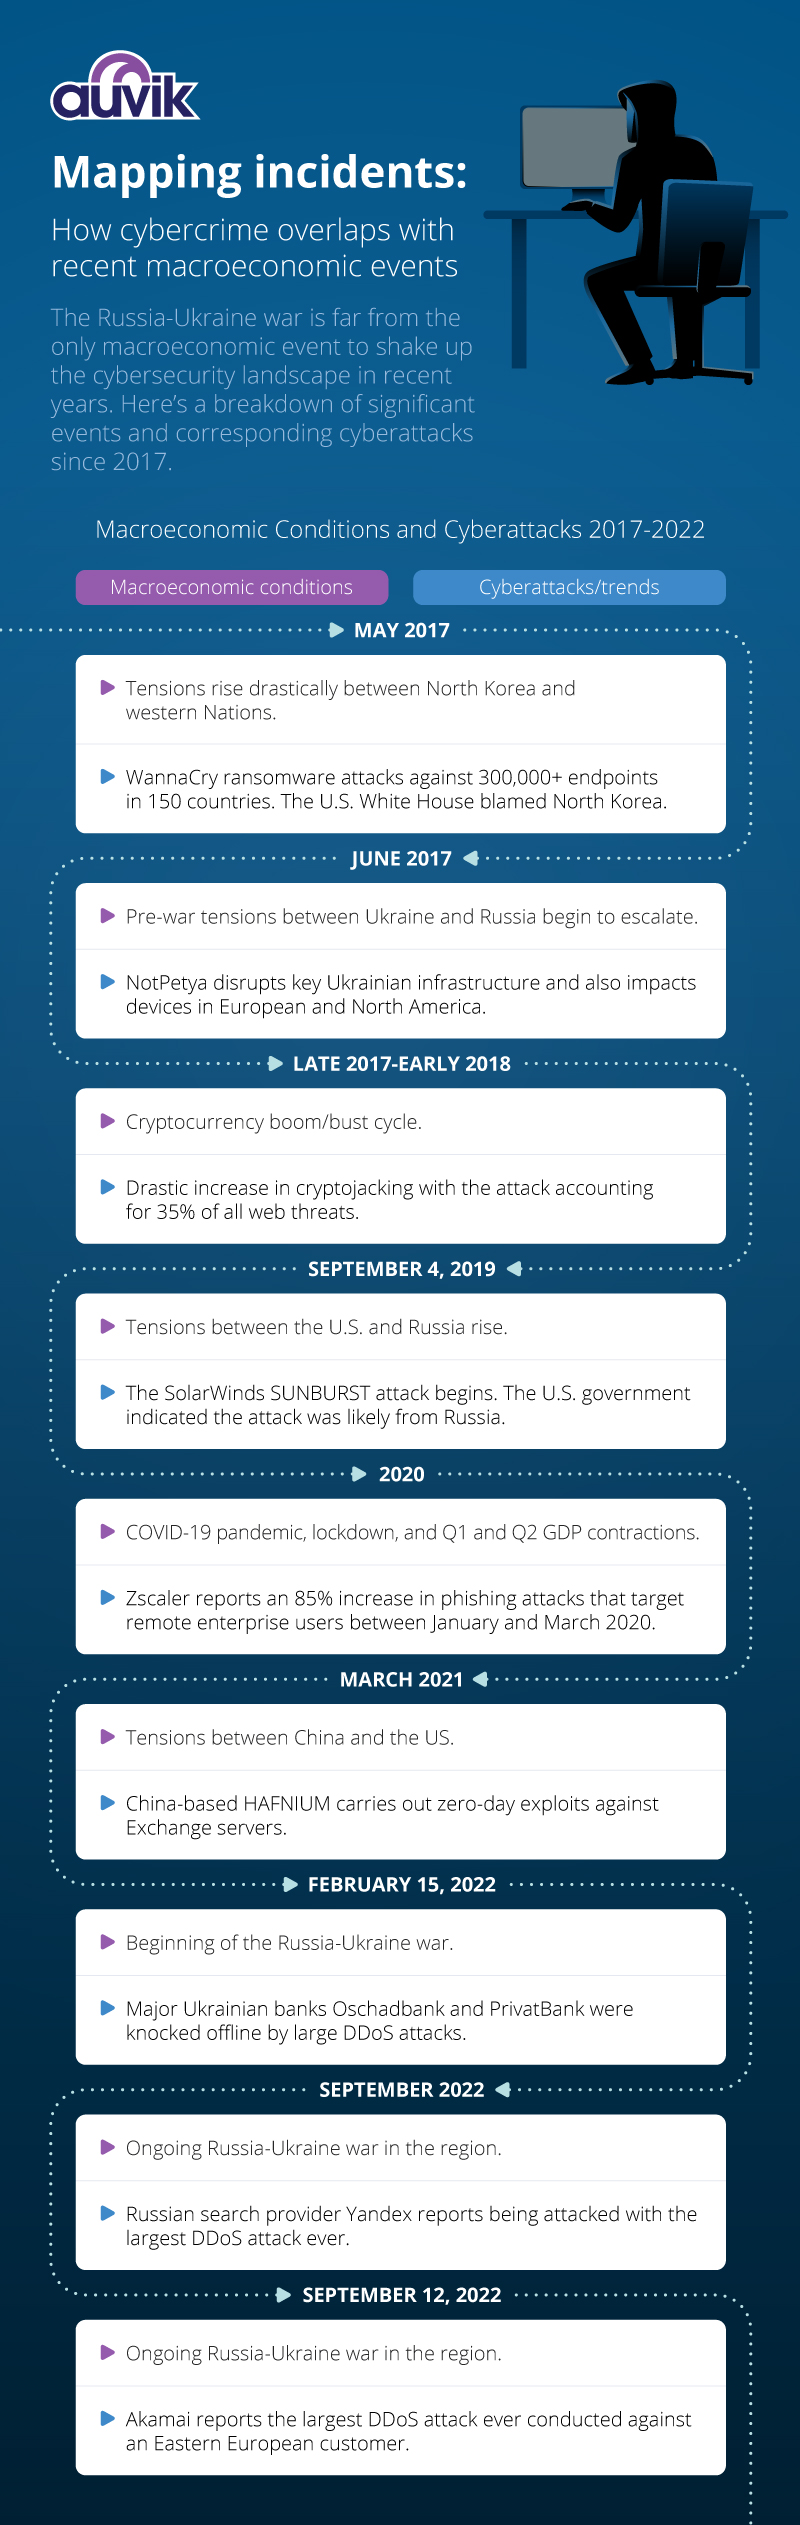 An infographic that outlines the intersection of global events and cybersecurity incidents of note since 2017